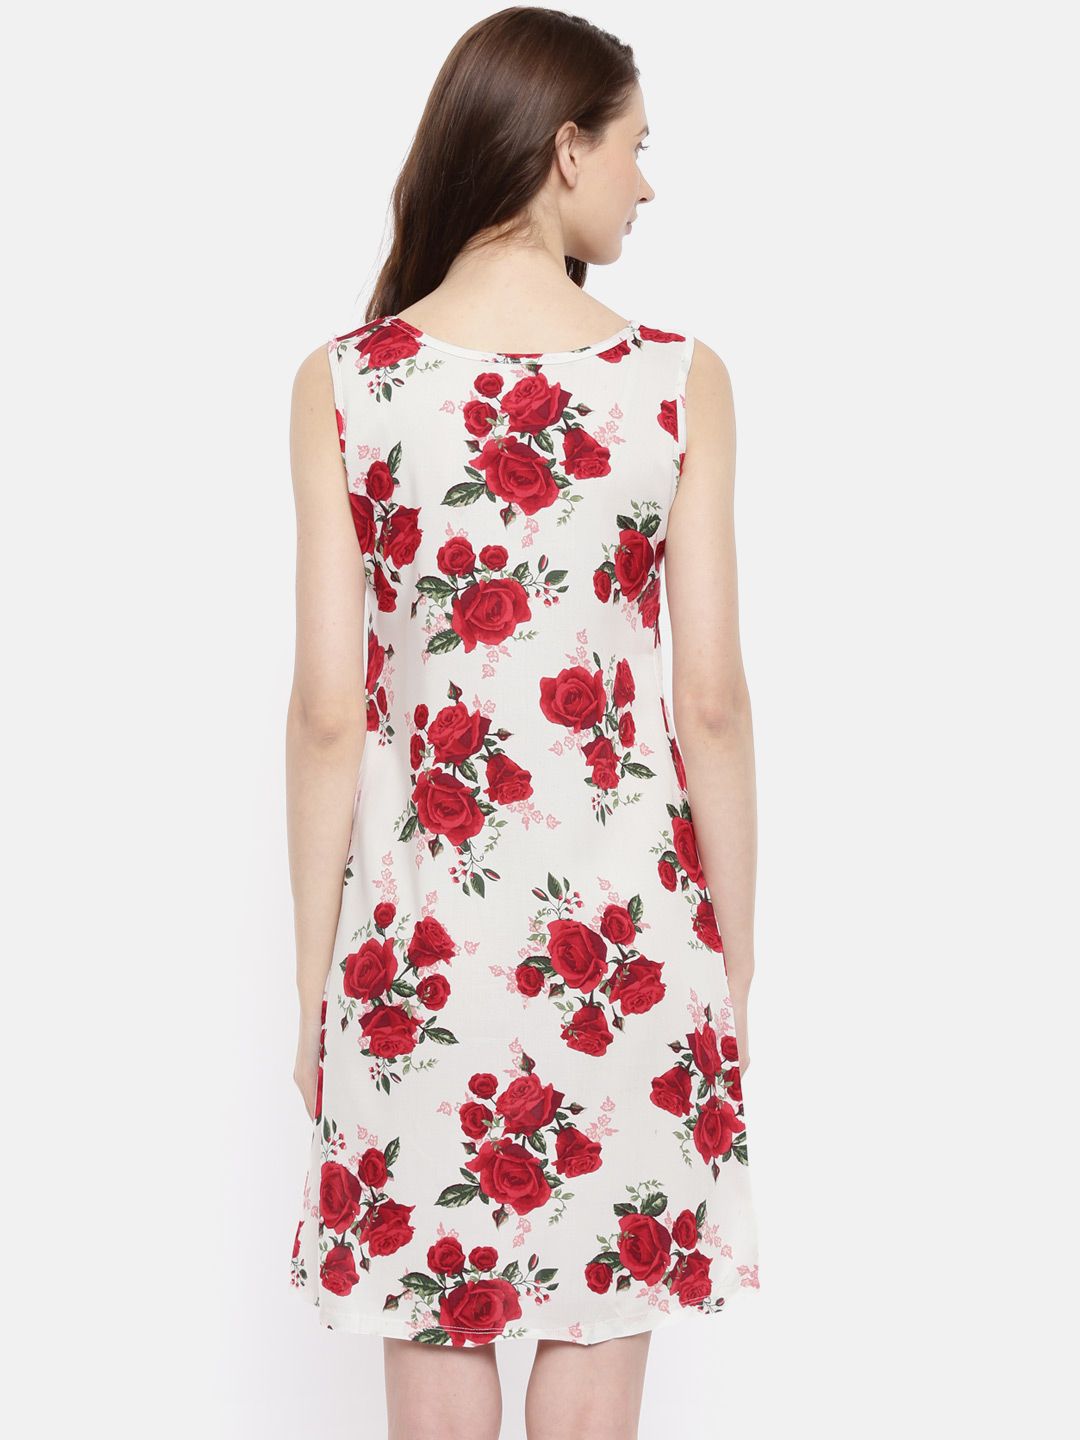 The White & Red Printed Summer Sheath Dress